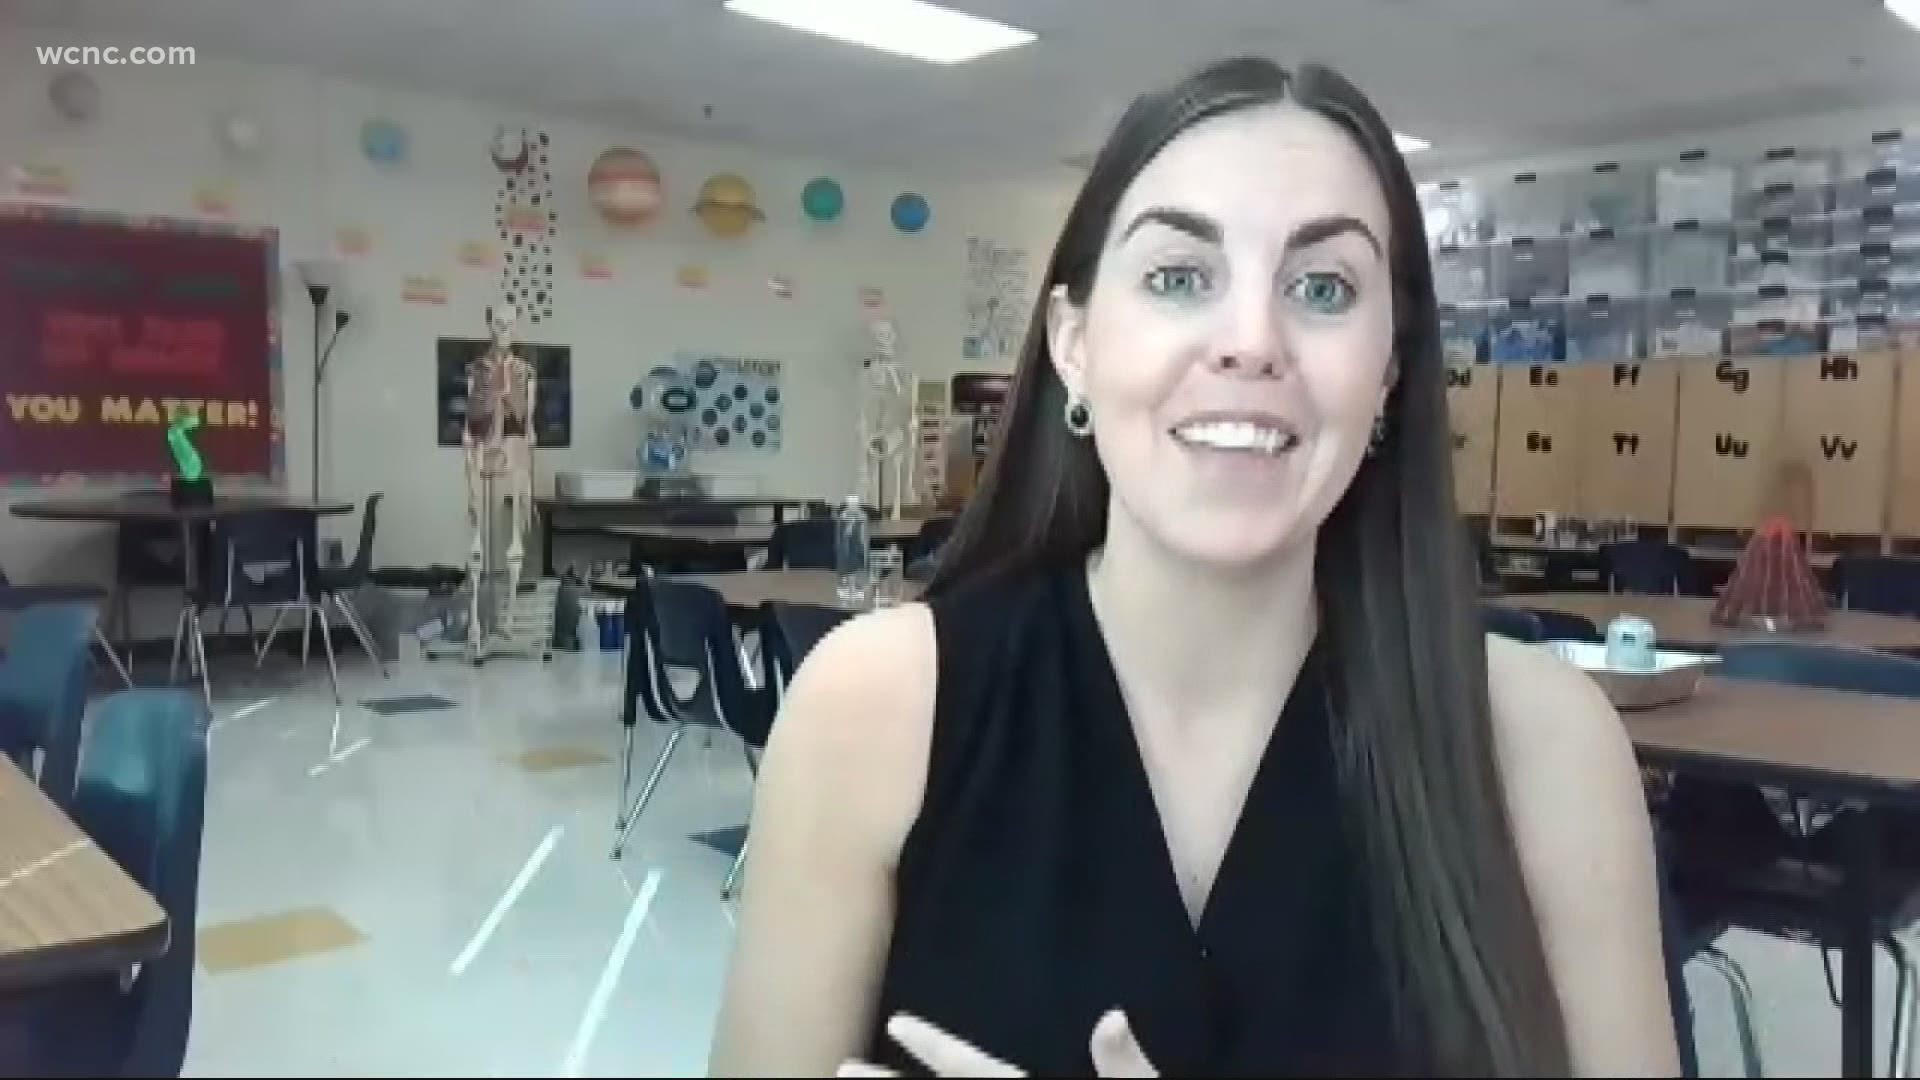 A Charlotte teacher found a new way to reach students while teaching remotely, and as a result, her fun science lessons went viral on Tik Tok.